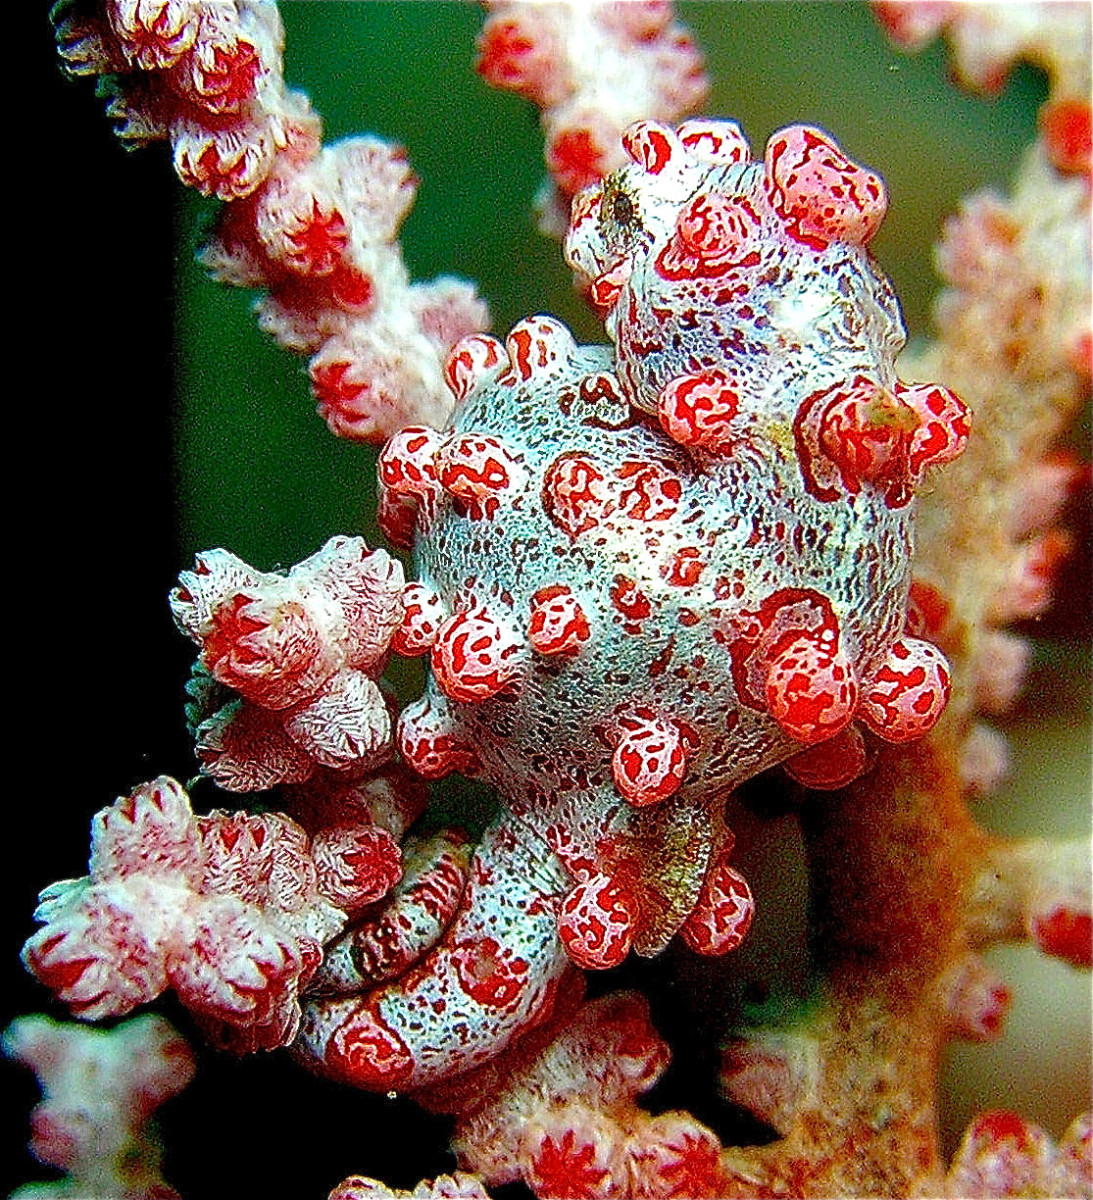 The body of the Bargibant's pygmy seahorse has specks and stripes that resemble those on the sea fan. Its tubercles resemble the polyps of the sea fan.